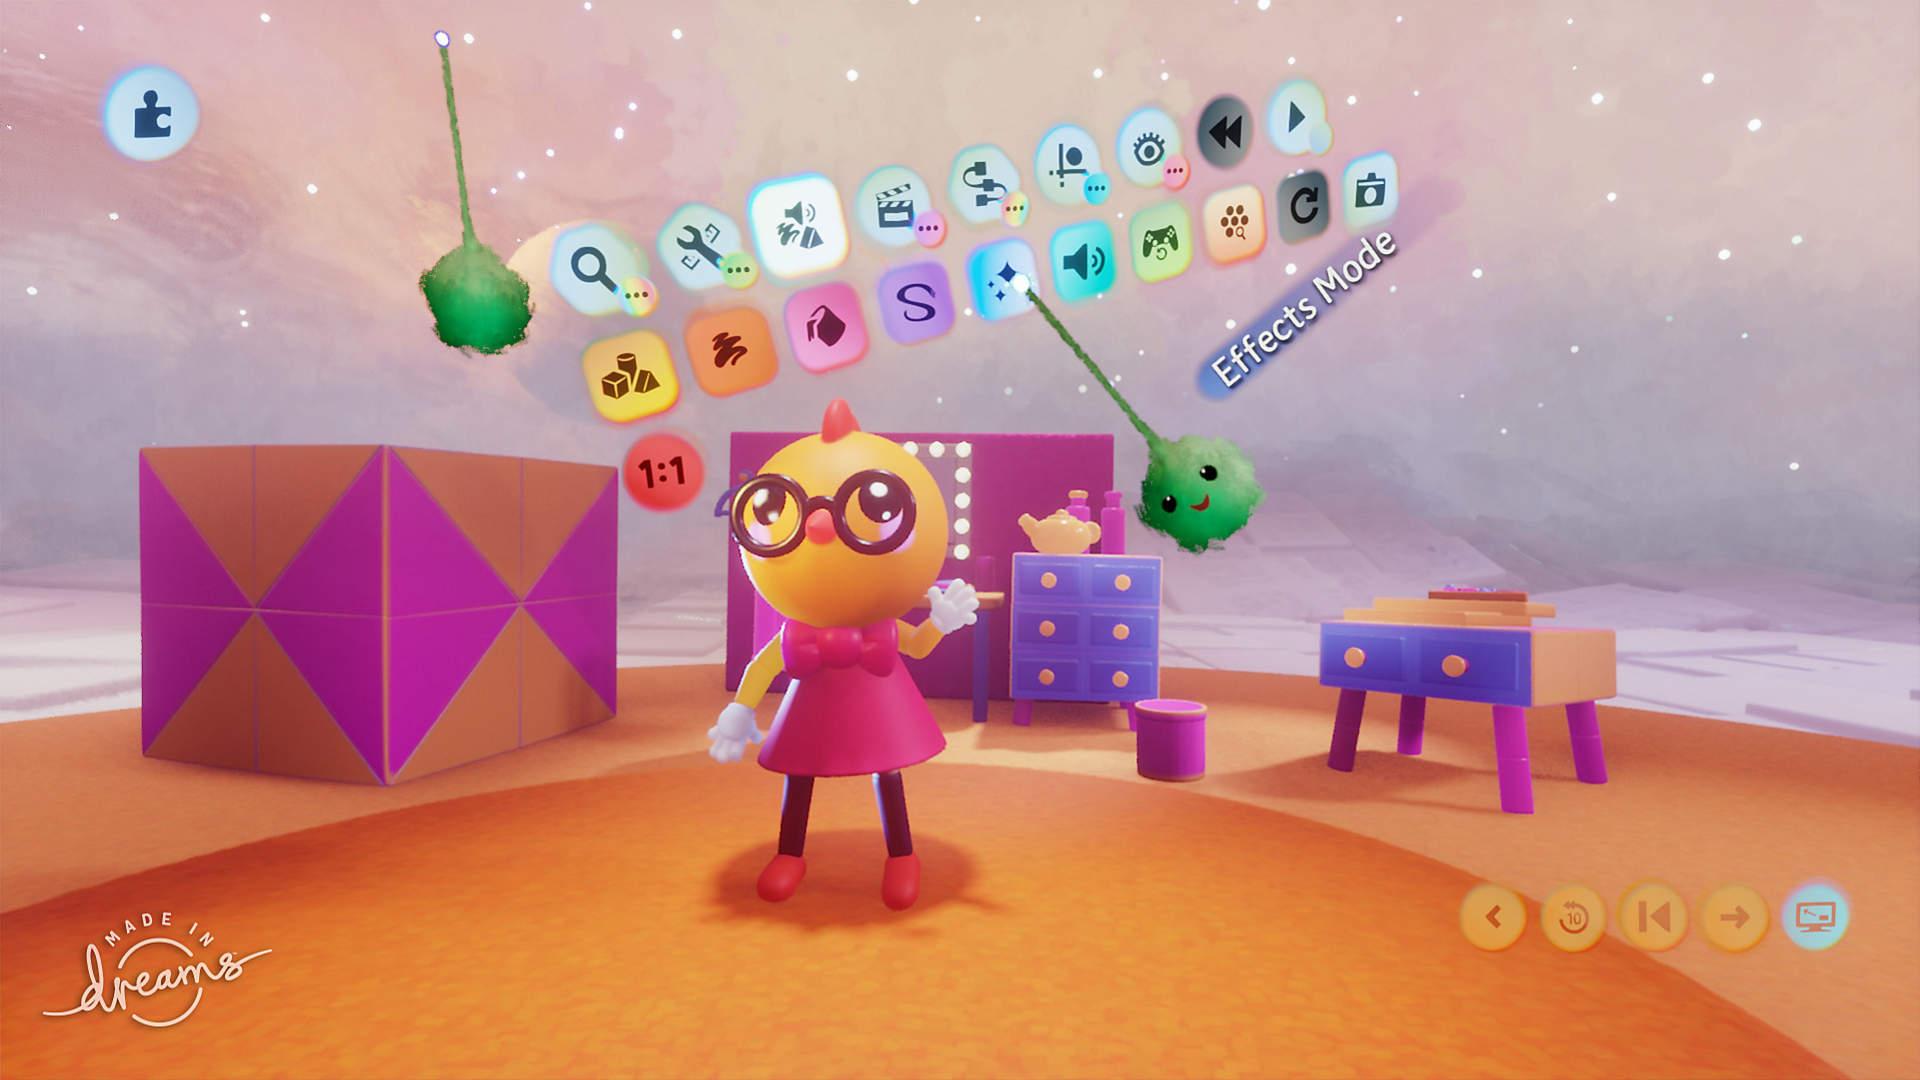 Dreams Wants to Make Game Developers of Us All, And I'm Convinced